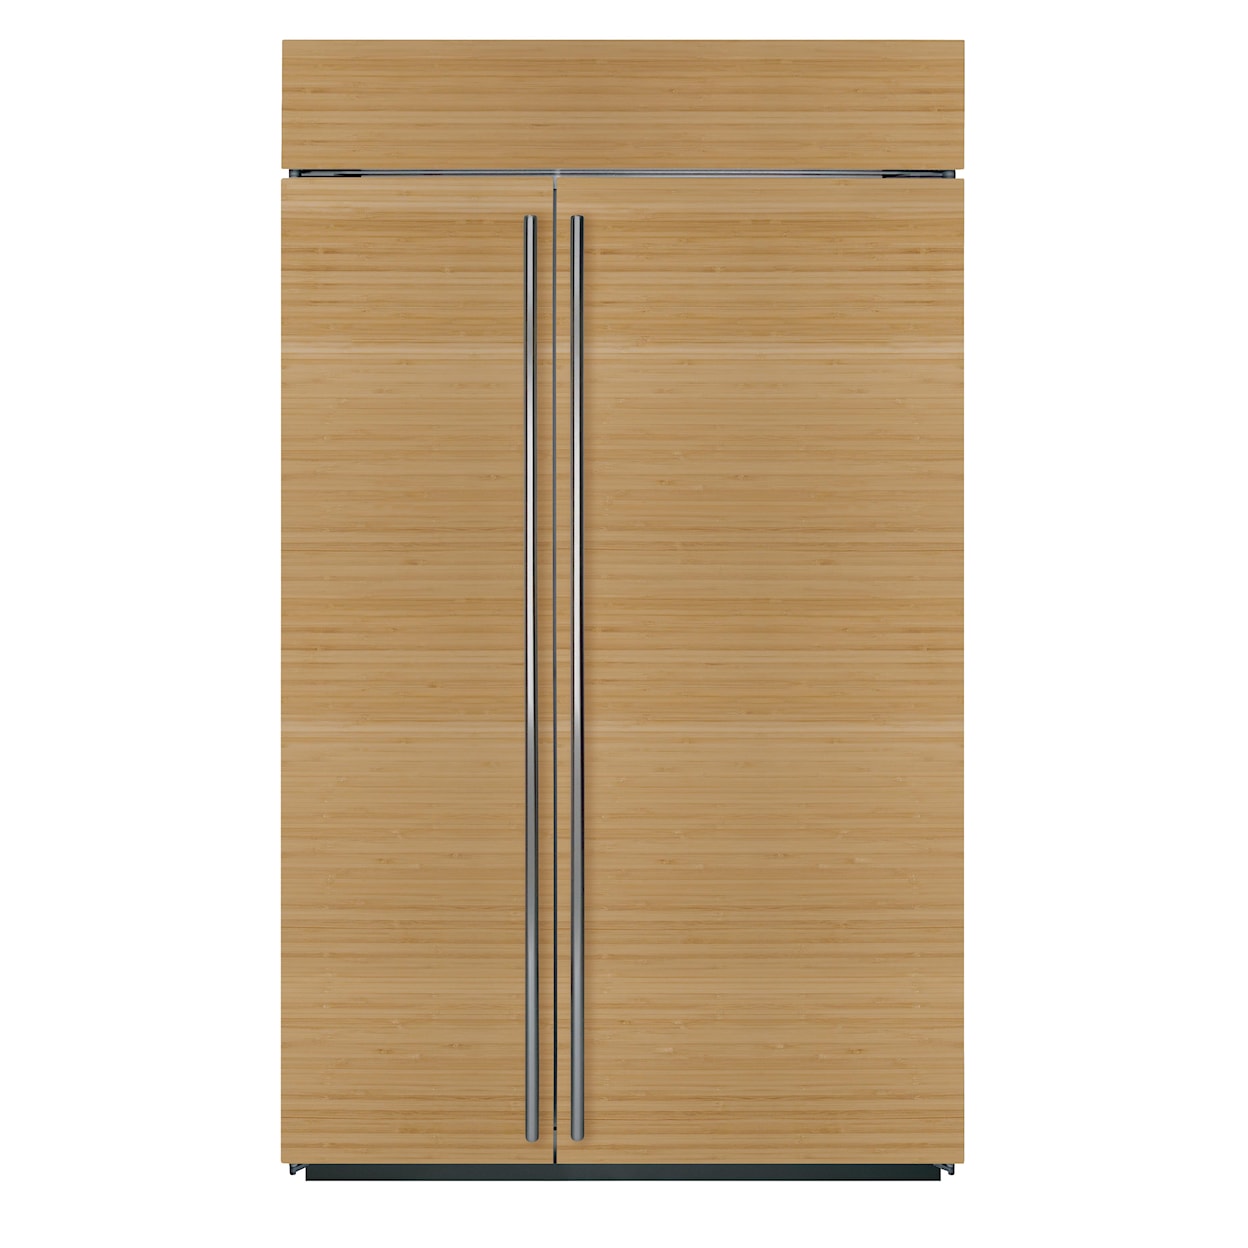 Sub-Zero Built-In Refrigeration 48" Side-by-Side with Refrigerator